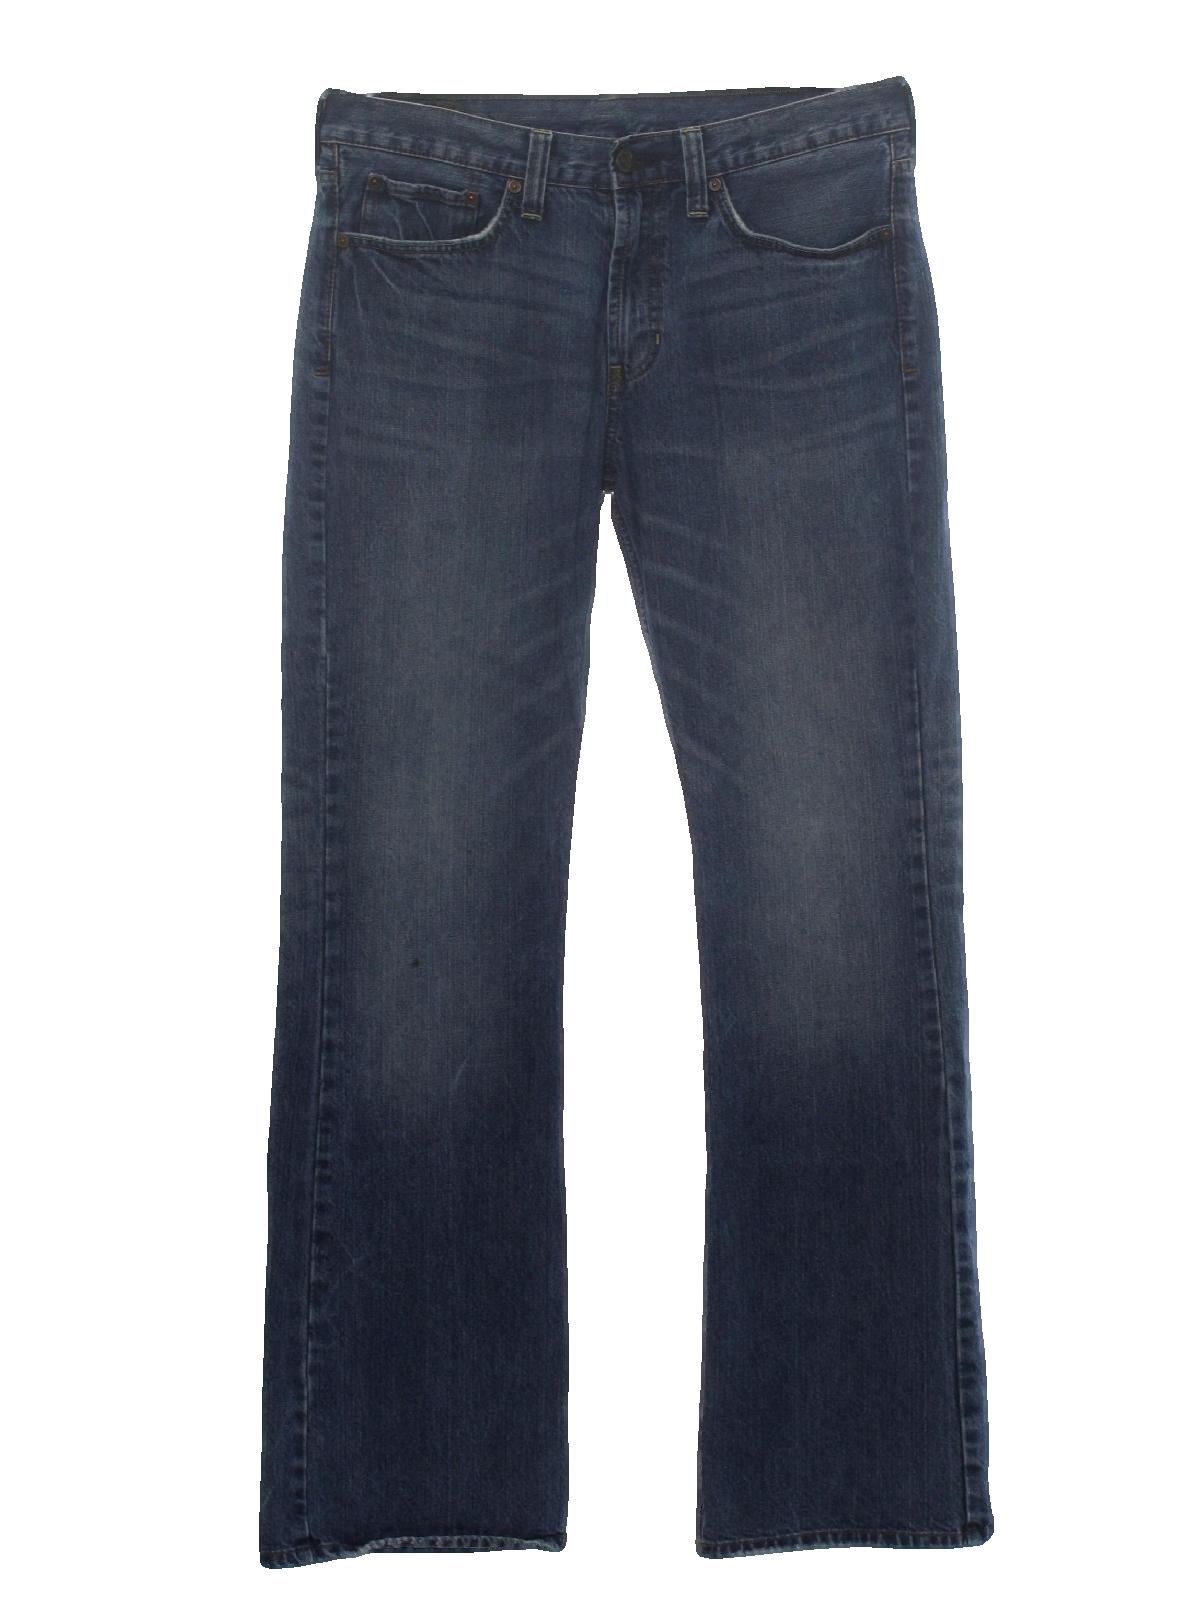 1970's Retro Flared Pants / Flares: 70s style (Made in 90s) -Bullhead ...